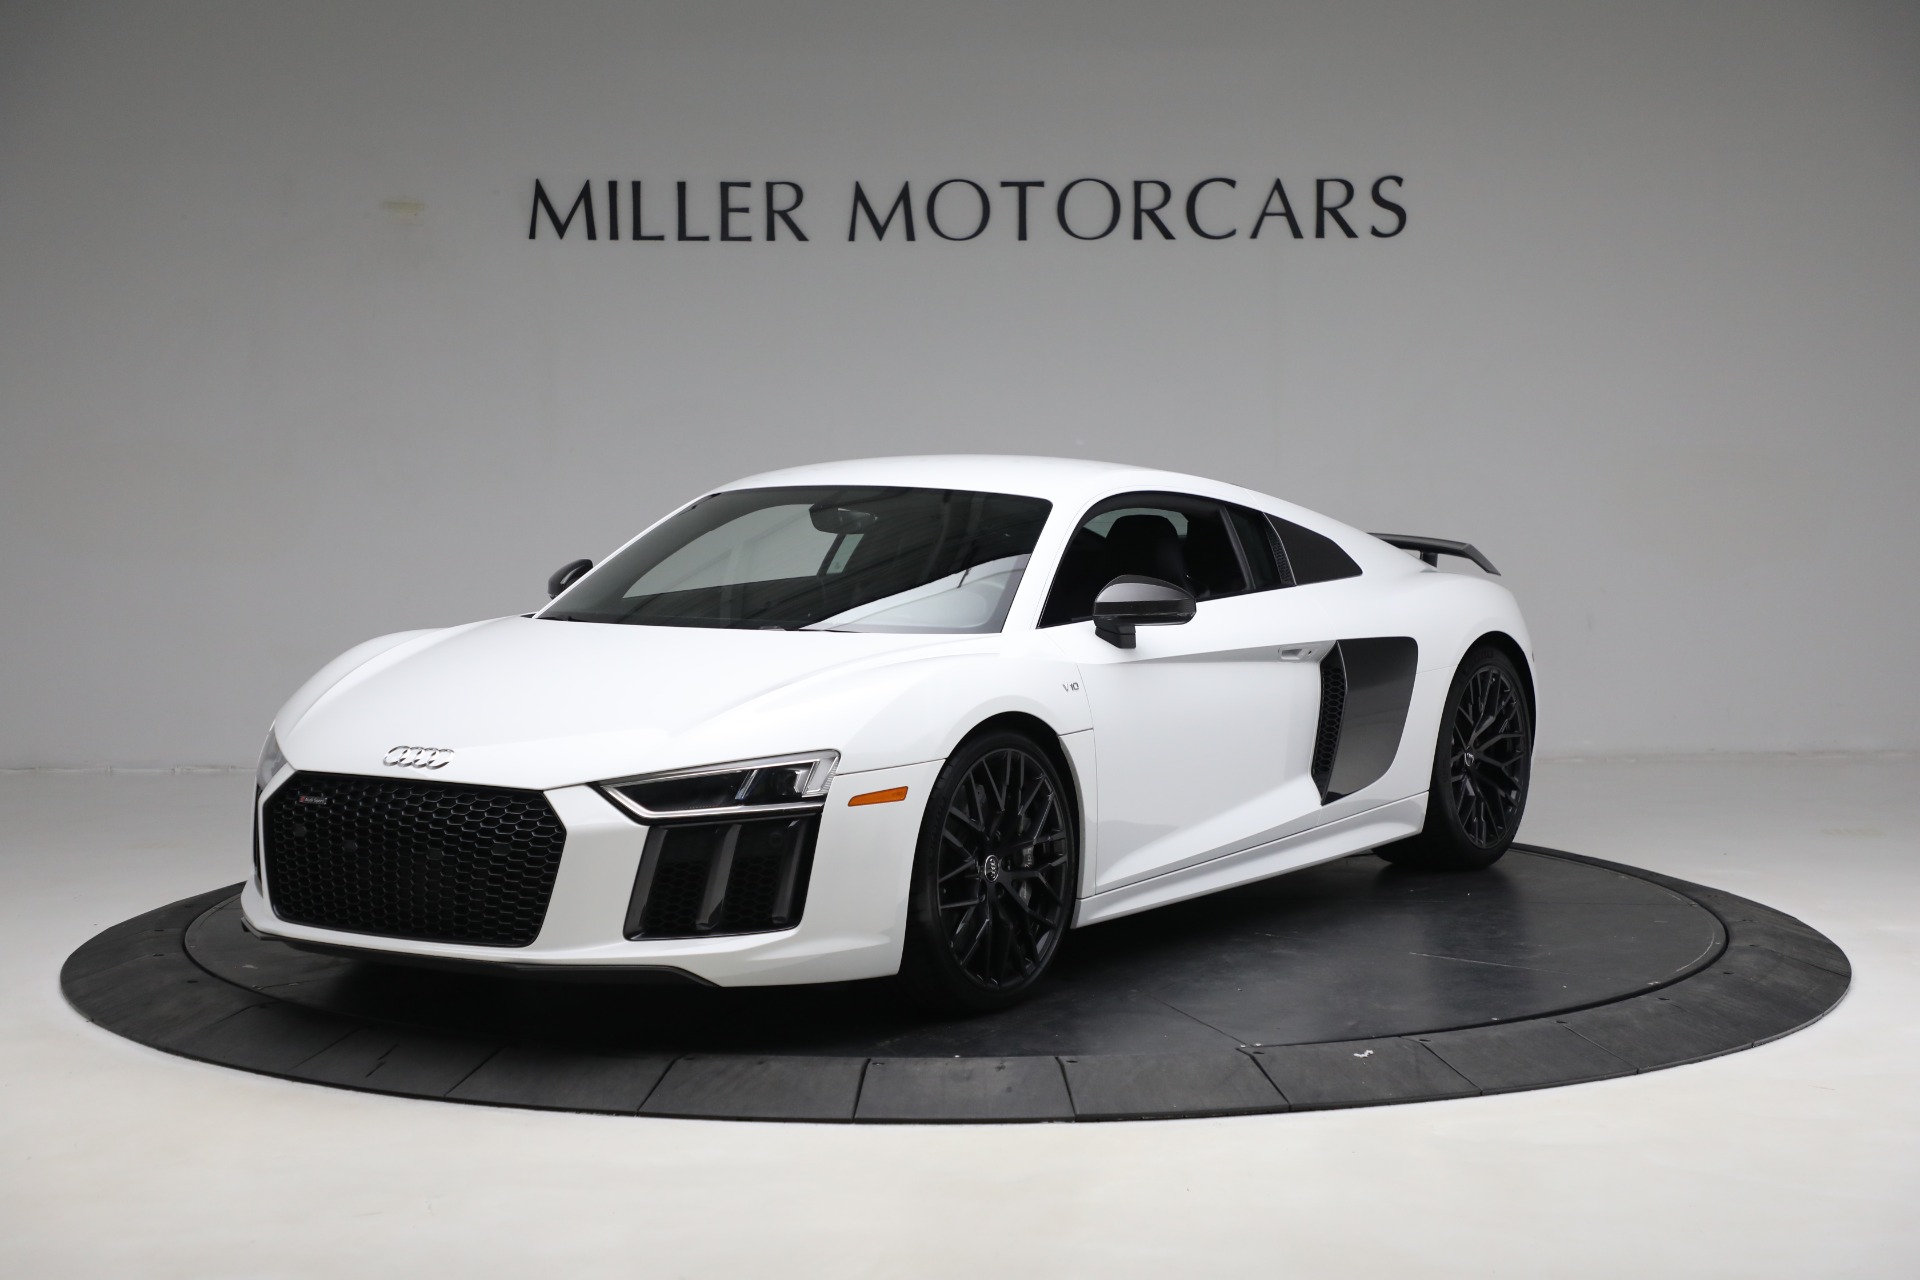 Used 2018 Audi R8 5.2 quattro V10 Plus for sale Sold at McLaren Greenwich in Greenwich CT 06830 1